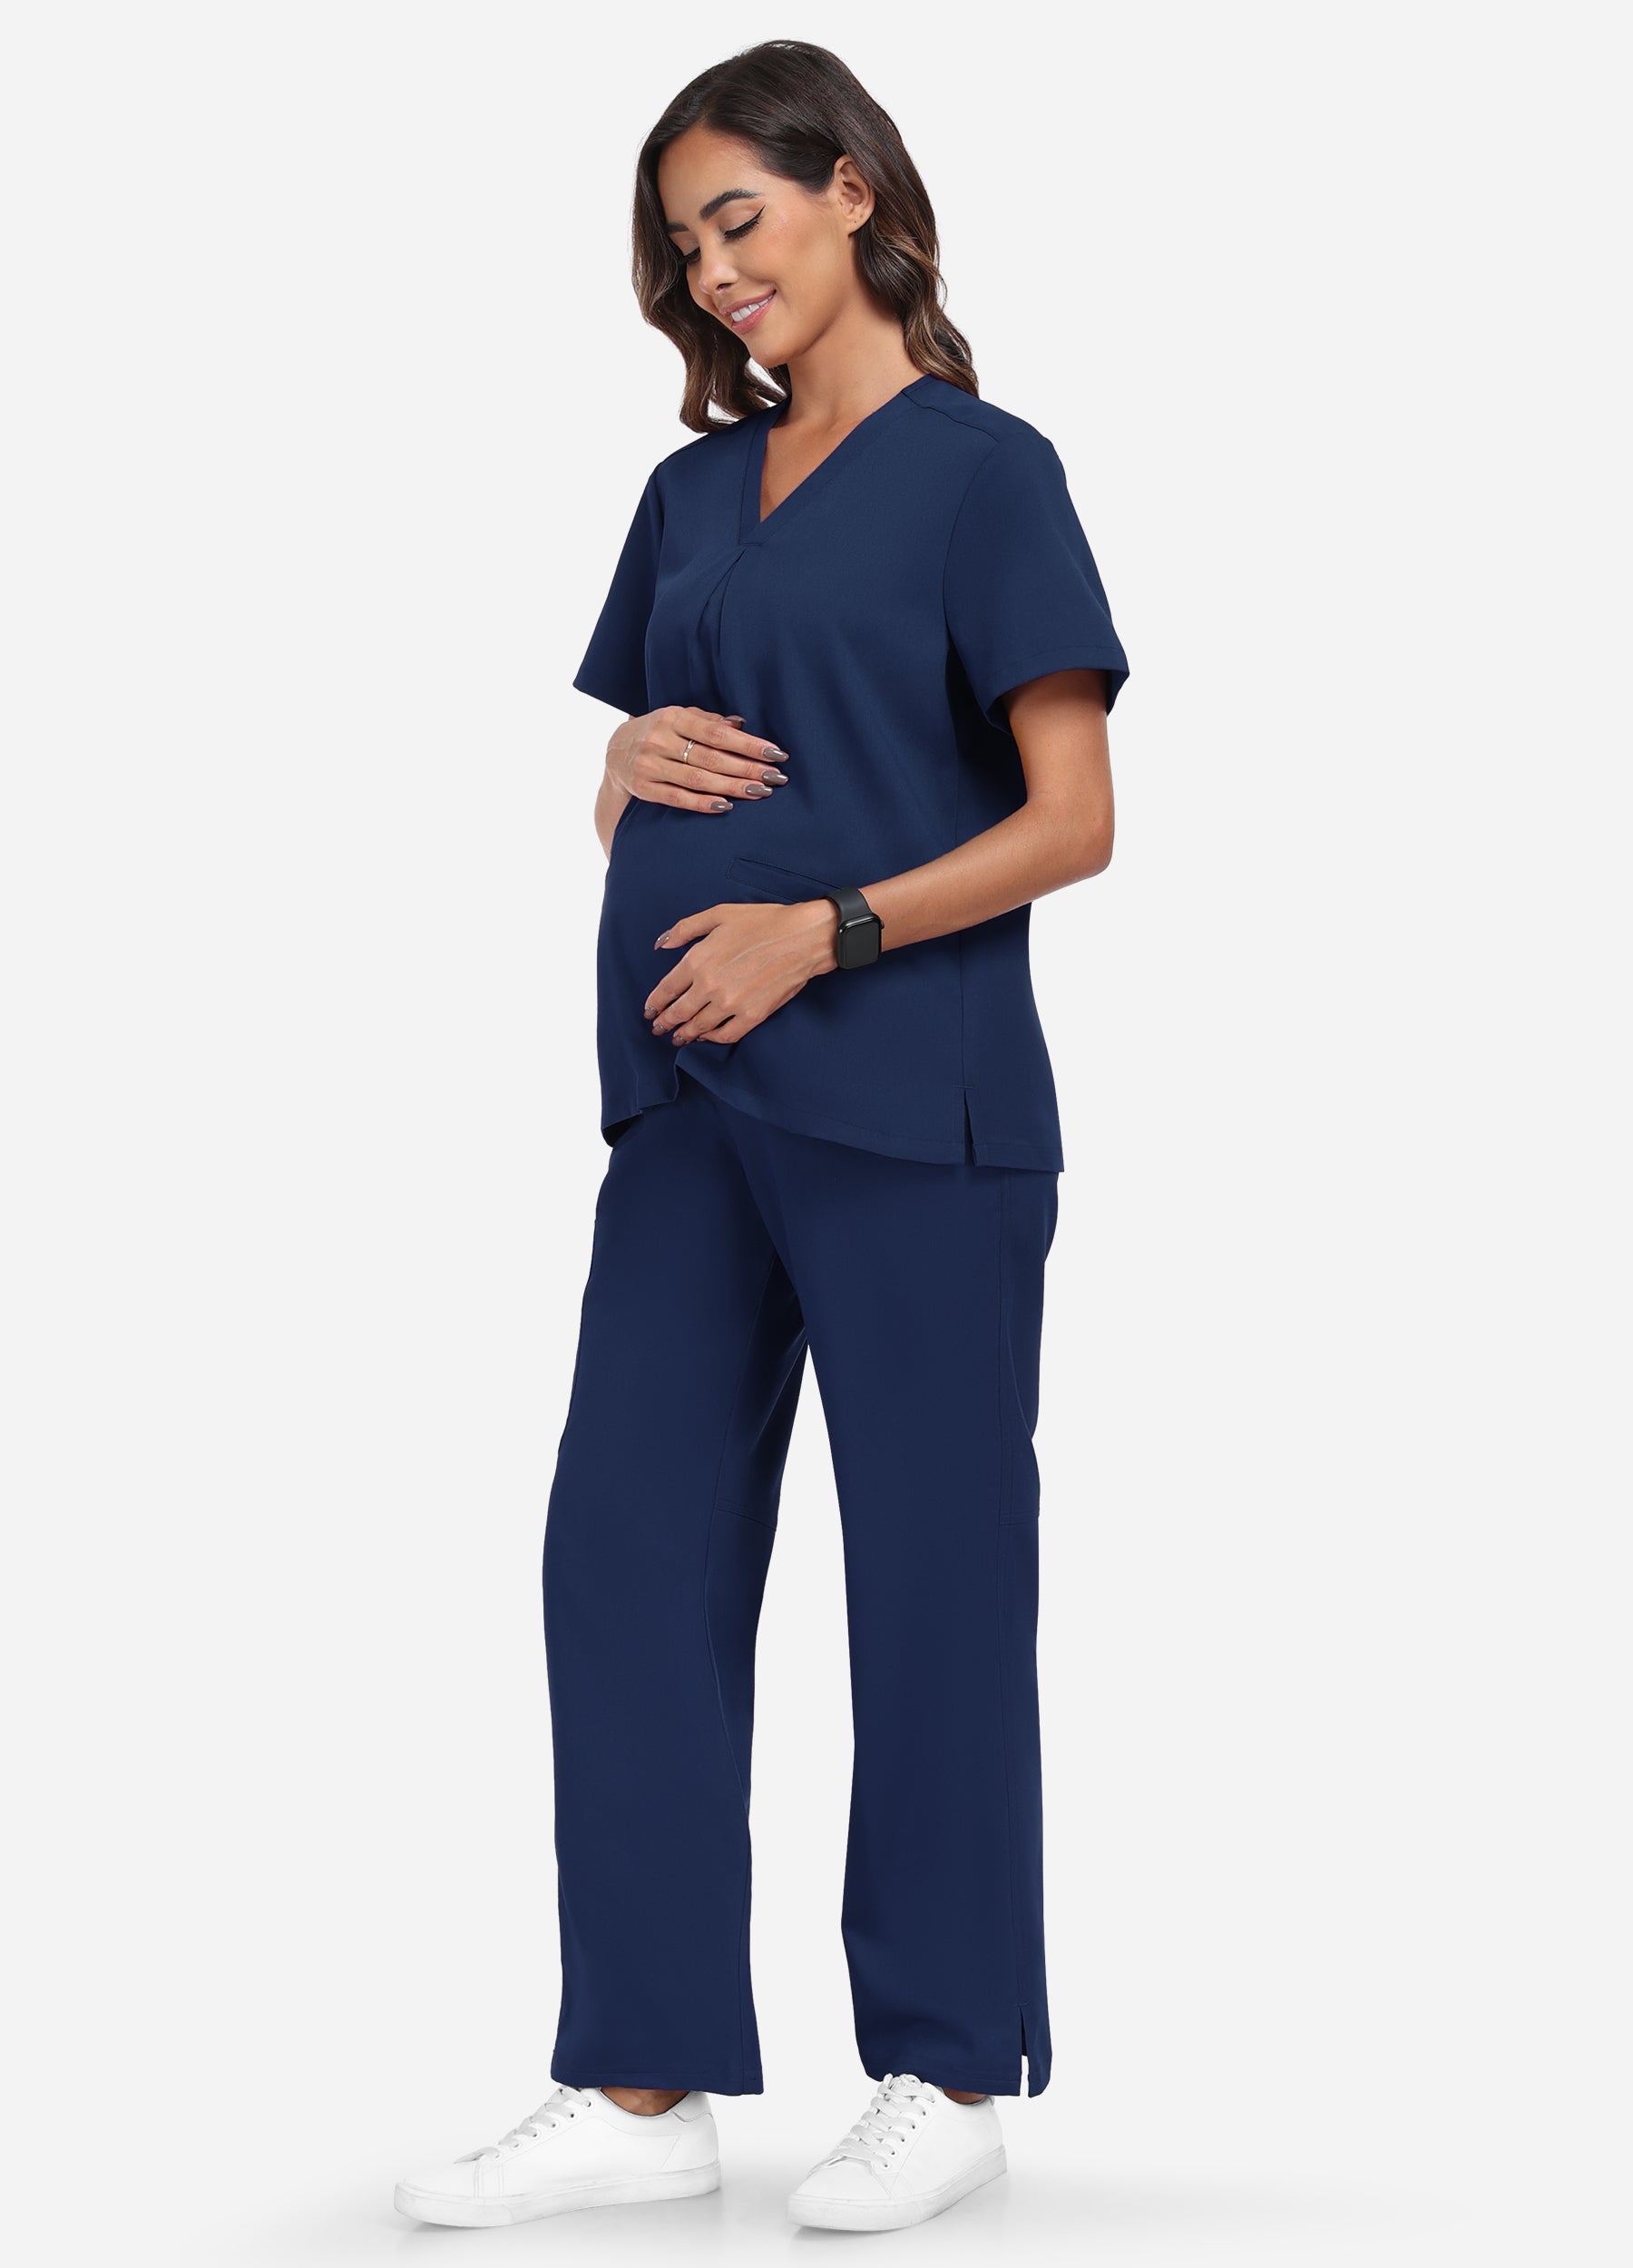 SoftTouch™ Maternity Scrub Top